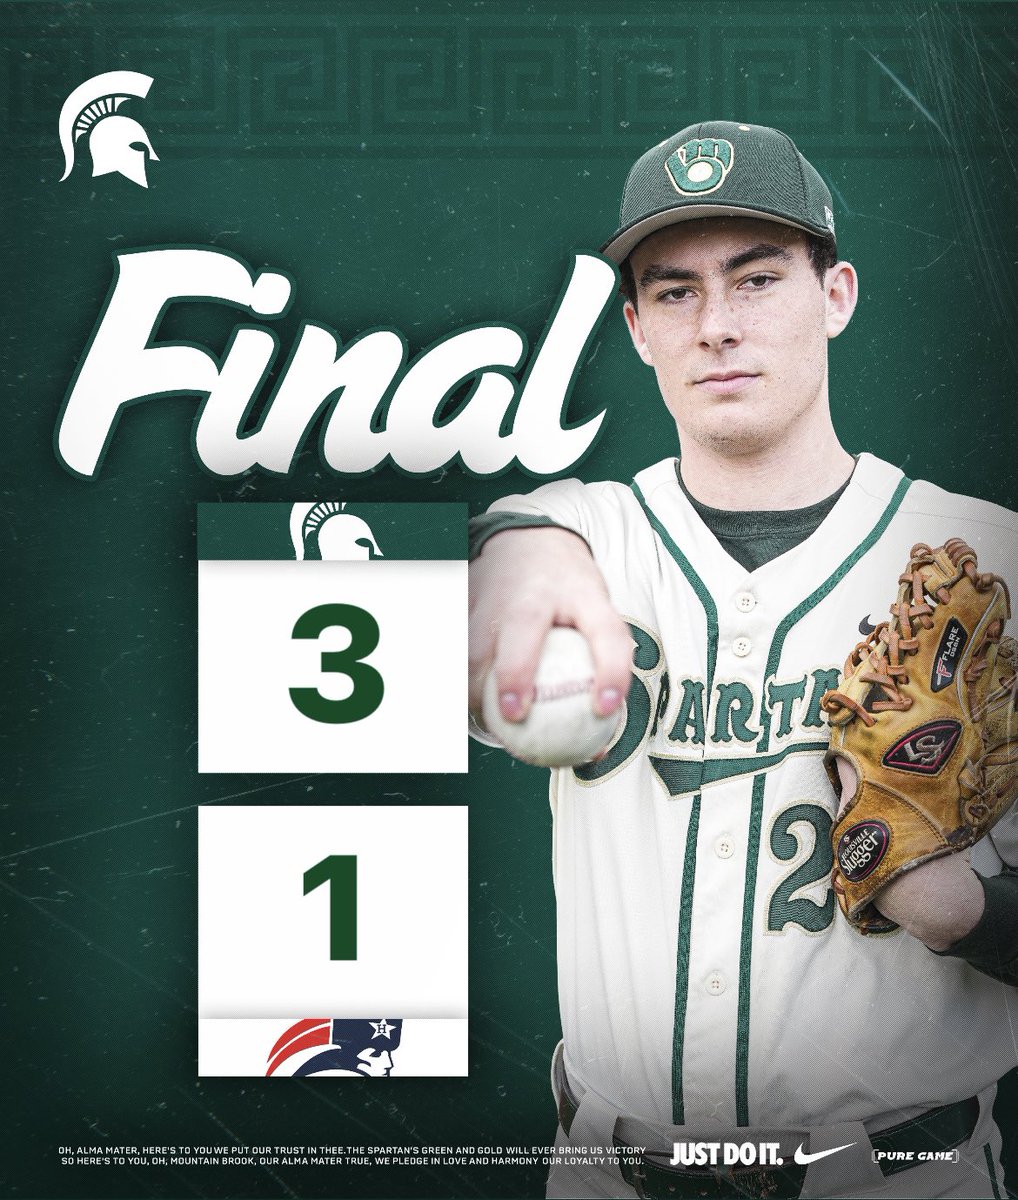 3-1 winners at Homewood in game 2 today to secure the area Championship! Caleb Barnett dominant with 12 Ks in the complete game win! @mbs_athletics @mtnbrookhs @SpartanAthFndn @caleb_barnett9